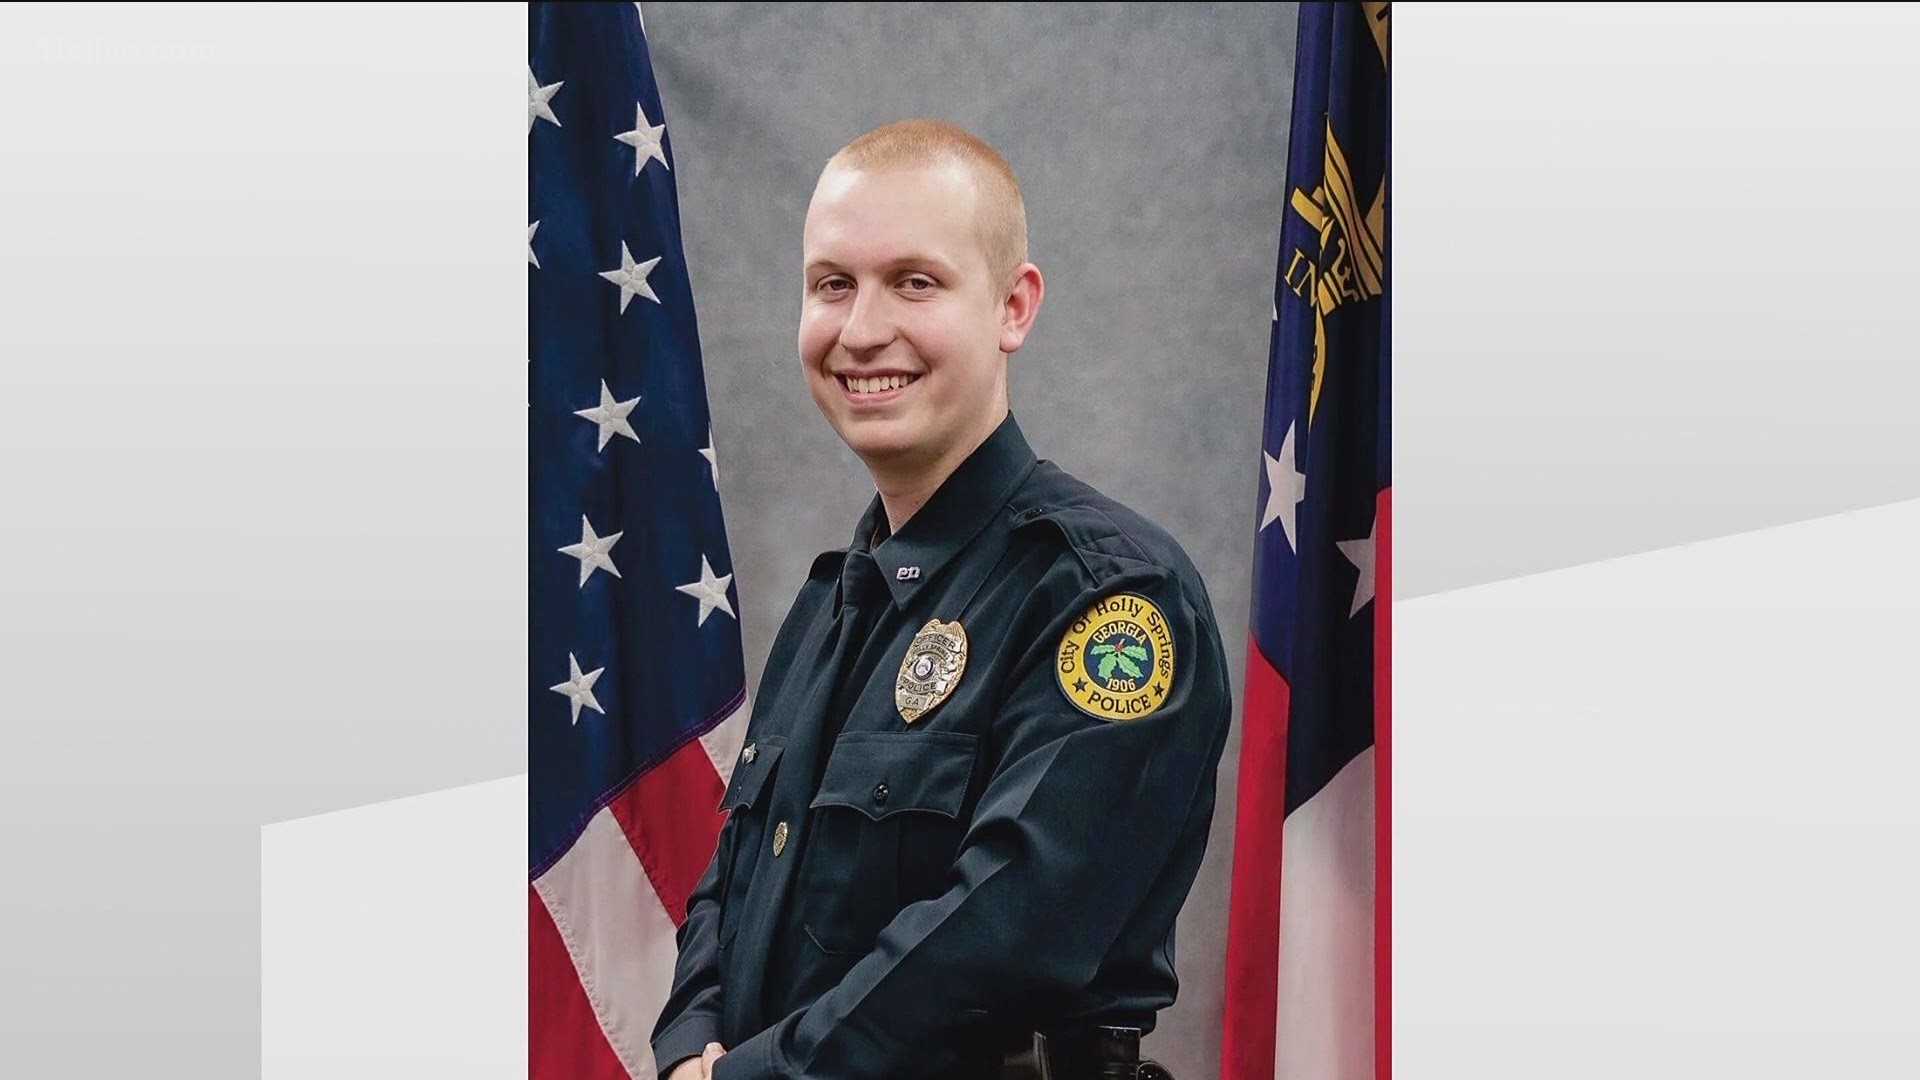 Days after he was killed during a traffic stop in Holly Springs, family, friends, and law enforcement officers from agencies across Georgia remembered his life.